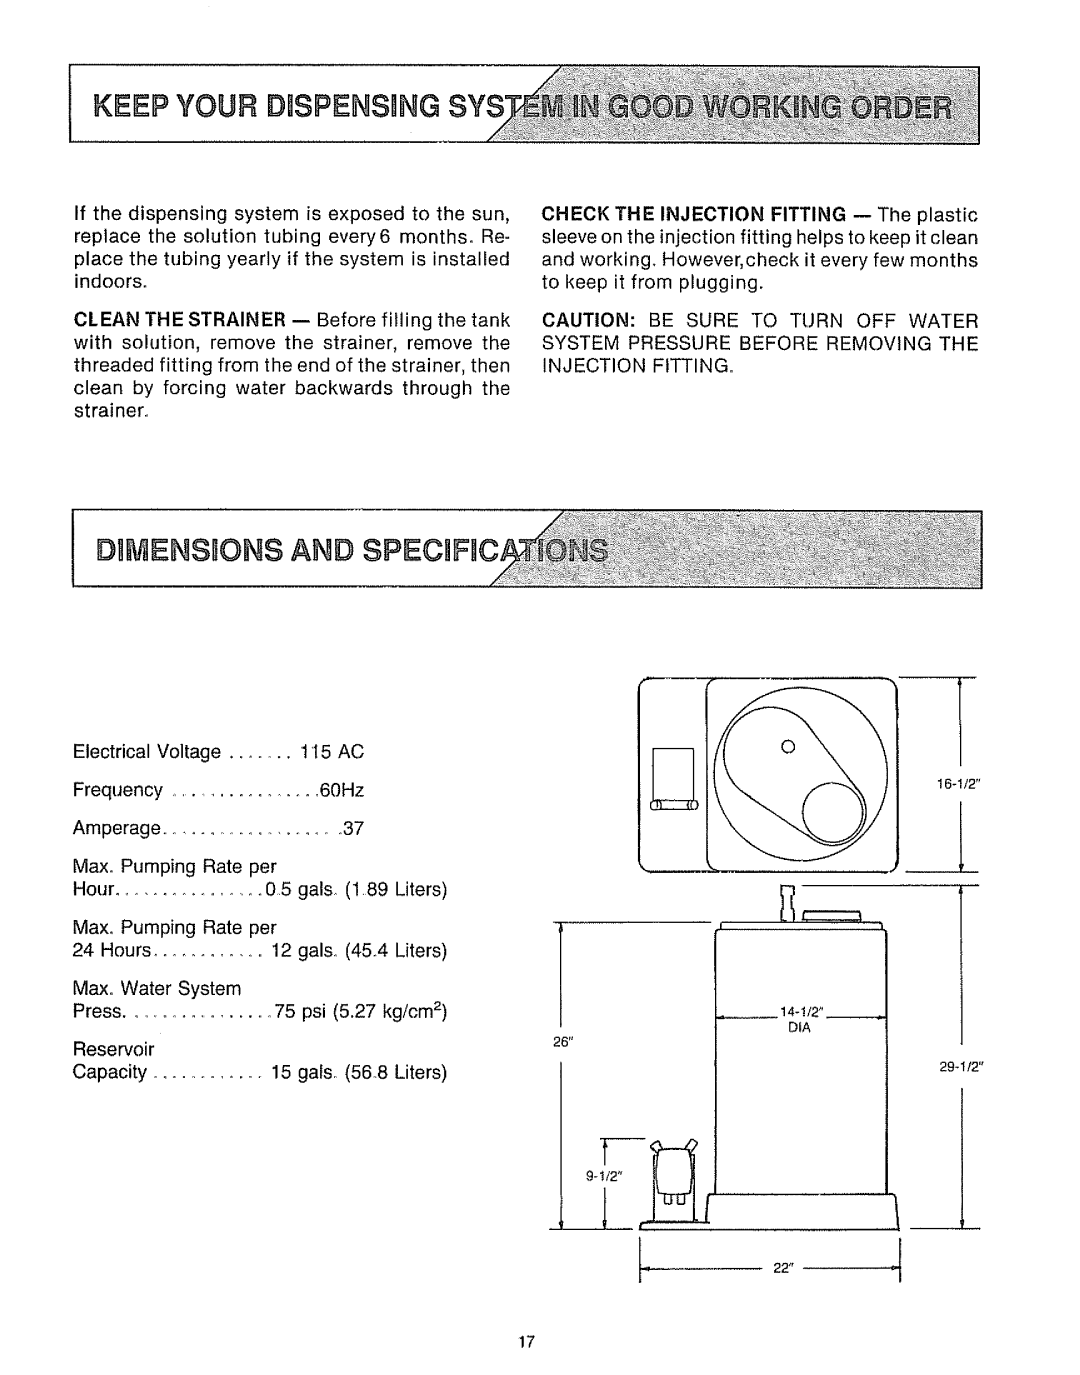 Sears 625.34929 owner manual Keep Your D Spensing, Dumensbonsand 